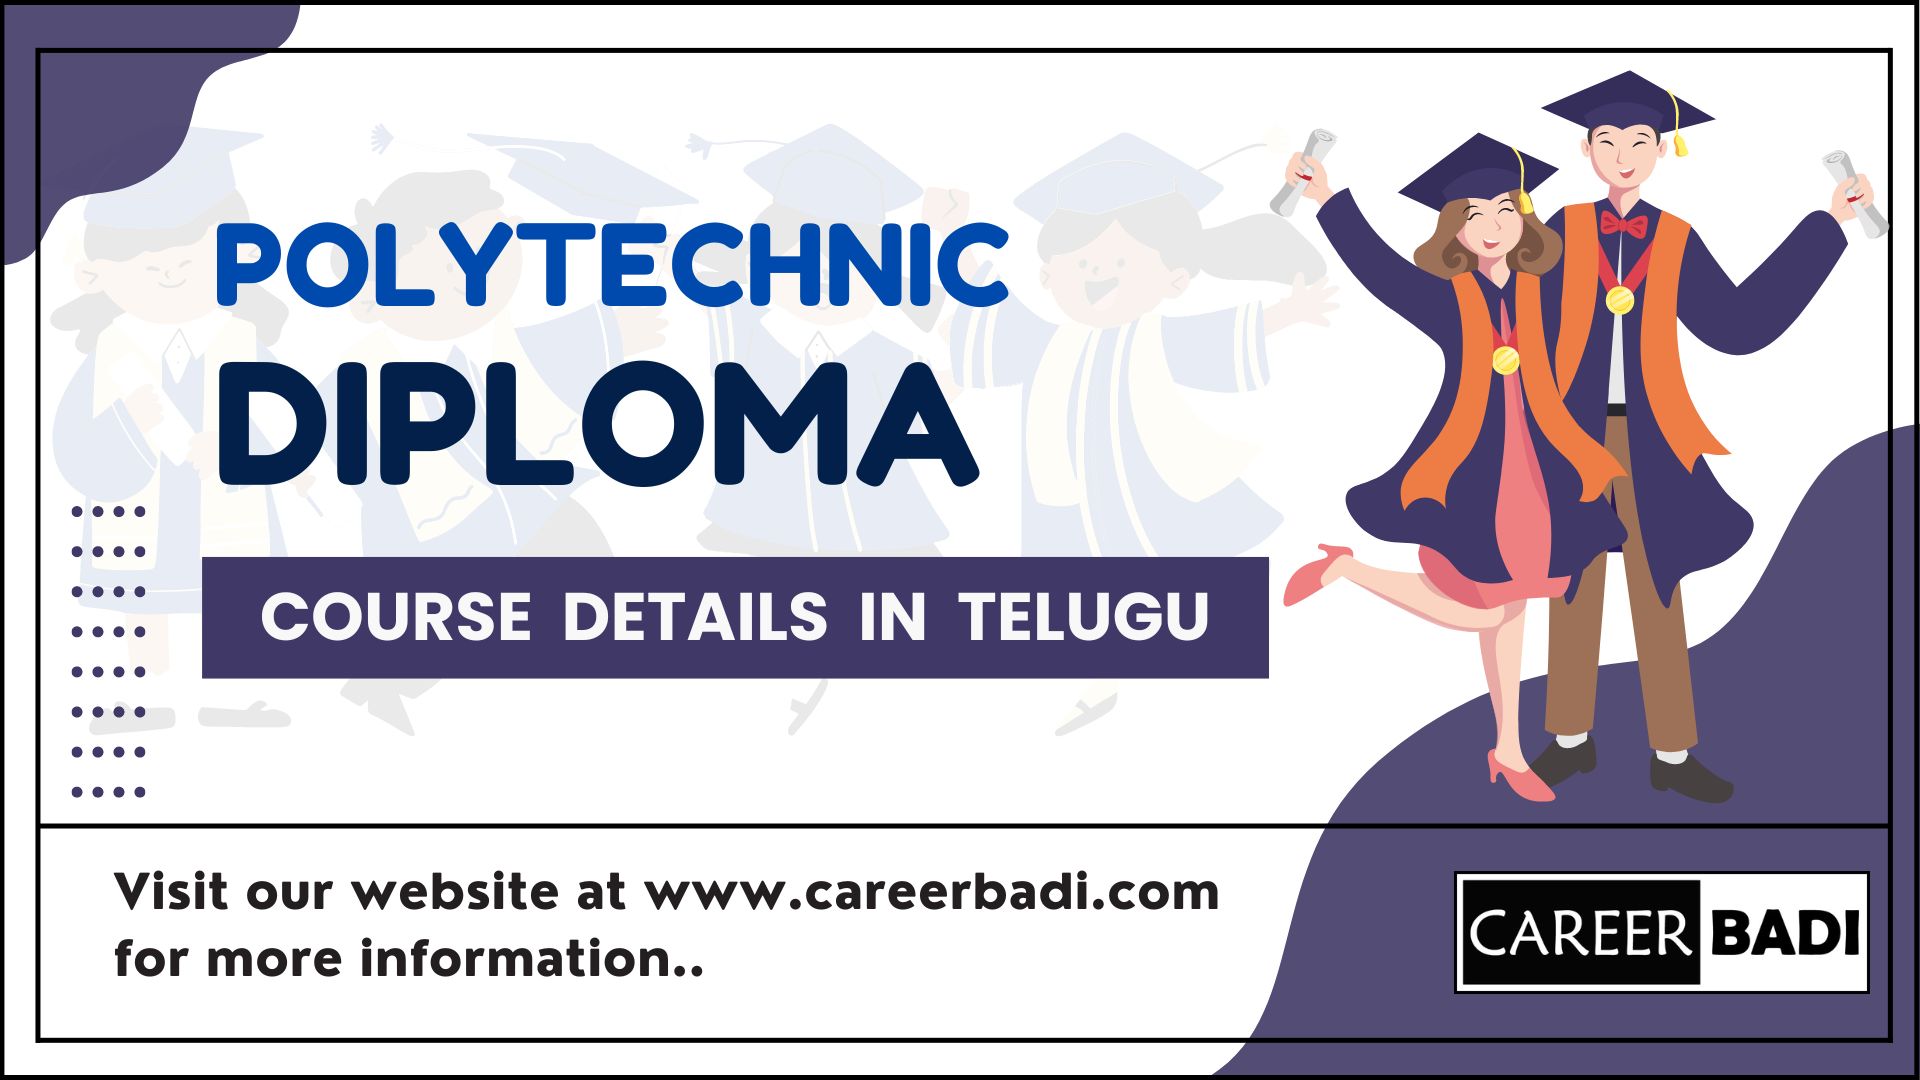 Polytechnic Diploma Course Details in Telugu